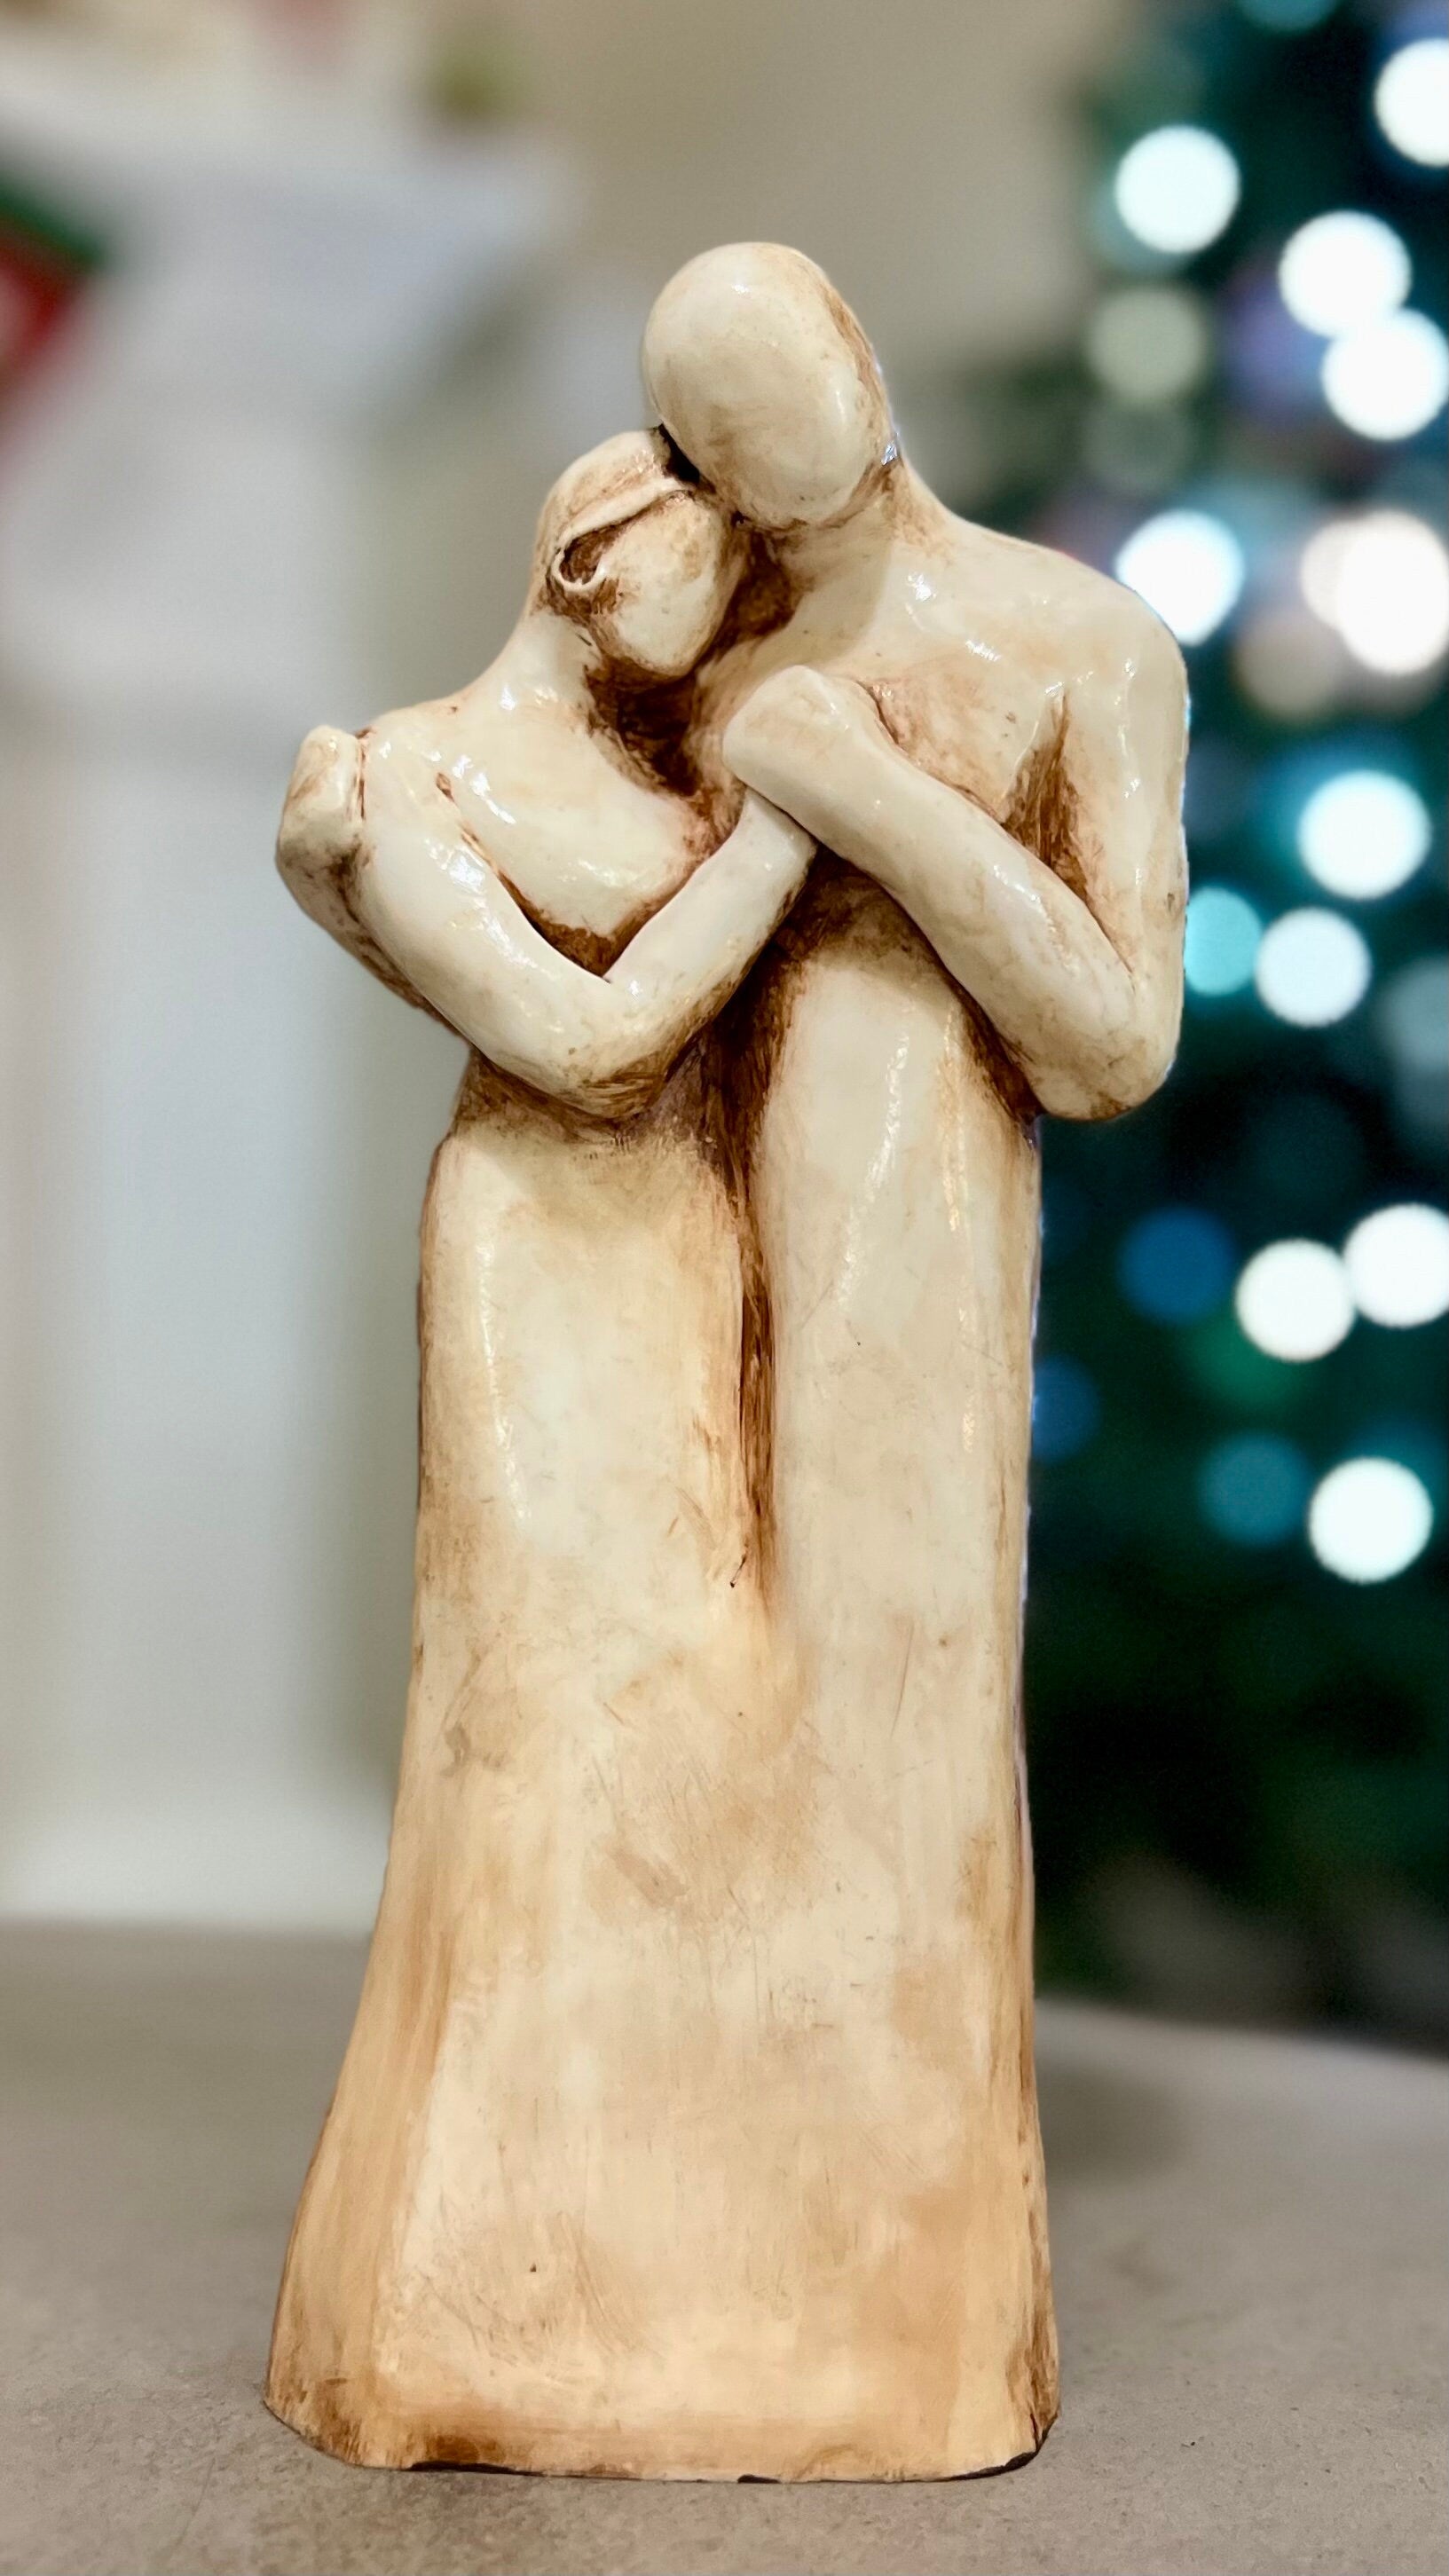 Polyresin Old Couple Show Piece Idol Statue for Home Office Decor Gift Item  | eBay